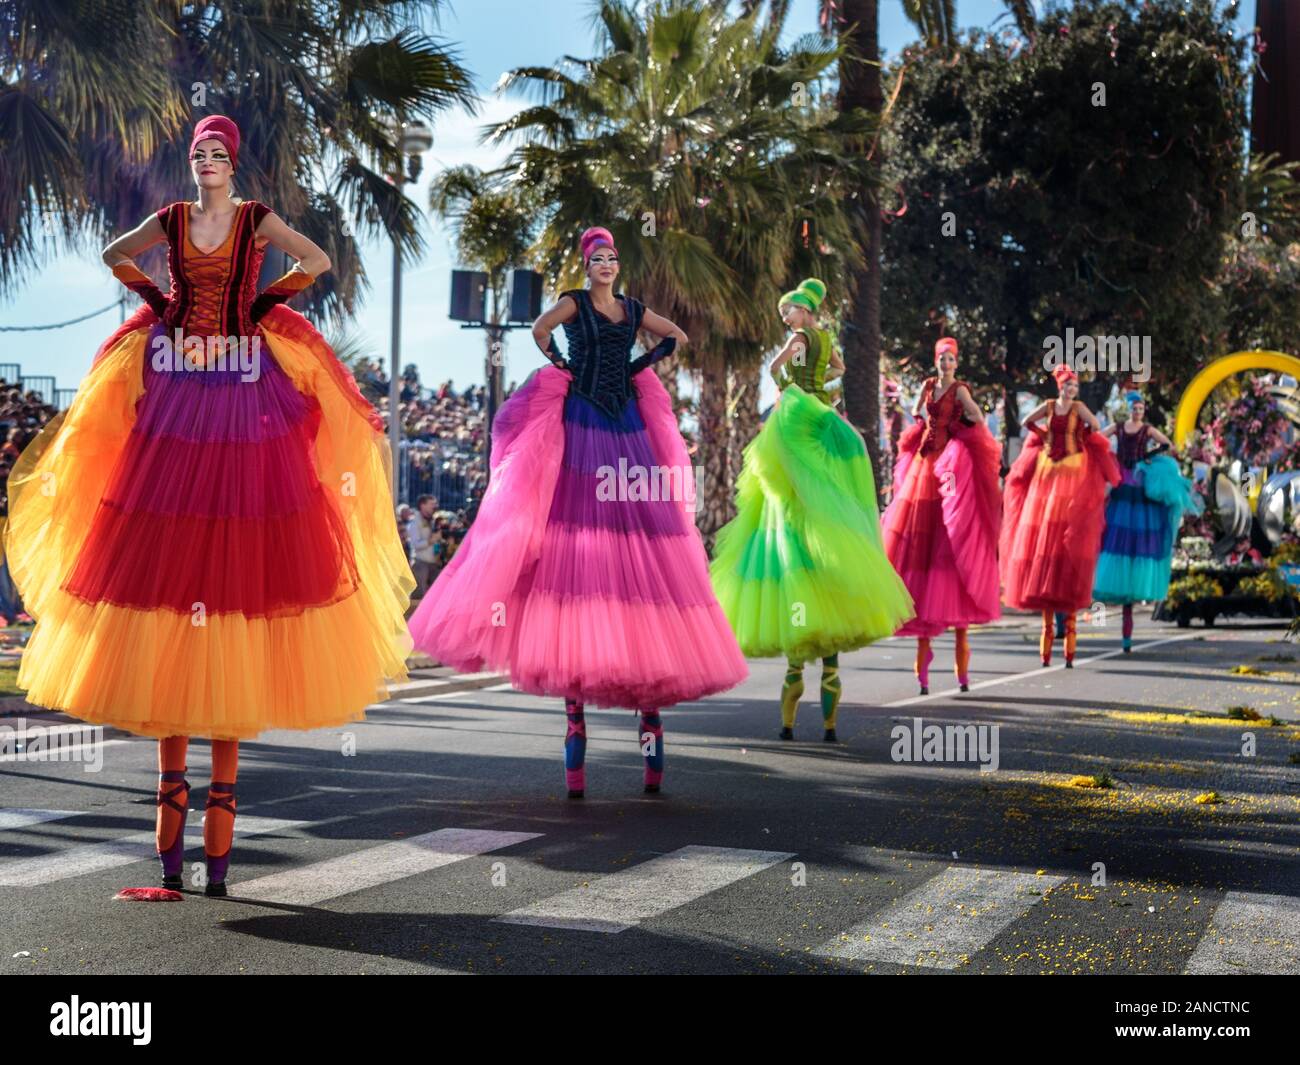 Performers in brightly coloured dresses and stilts at the Flower Parade, Nice Carnival, French Riviera, Cote d'Azur, France. Stock Photo